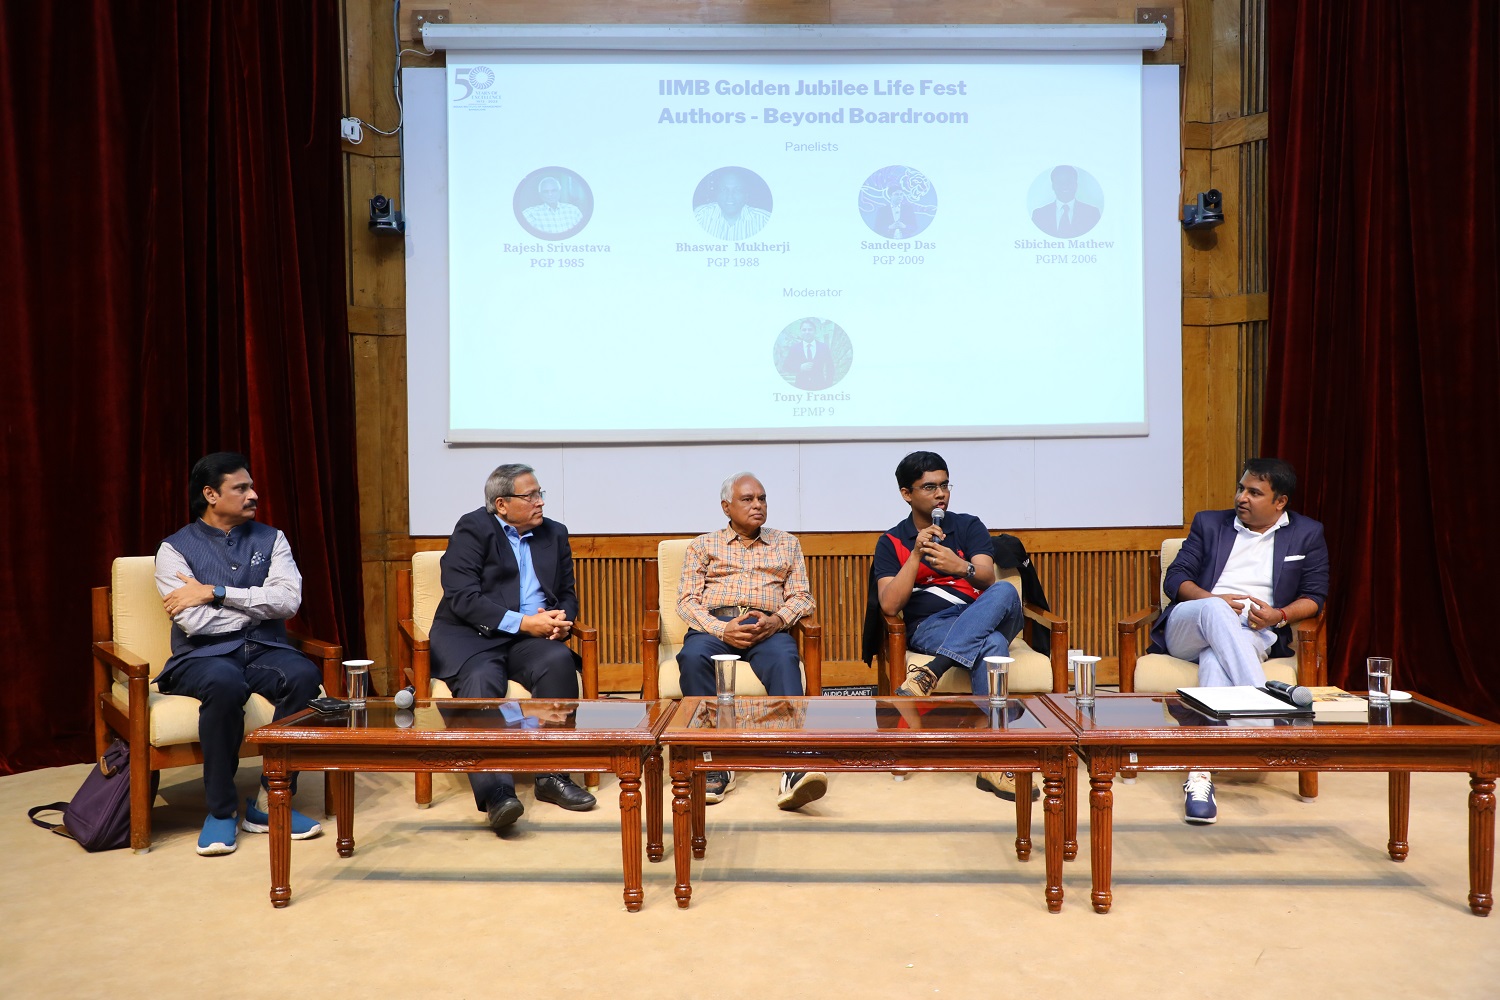 The Alumni Relations Office of IIMB hosted a Life Fest on 29th October 2023, as part of the Alumni Events, to mark the Institute’s Golden Jubilee Week celebrations.